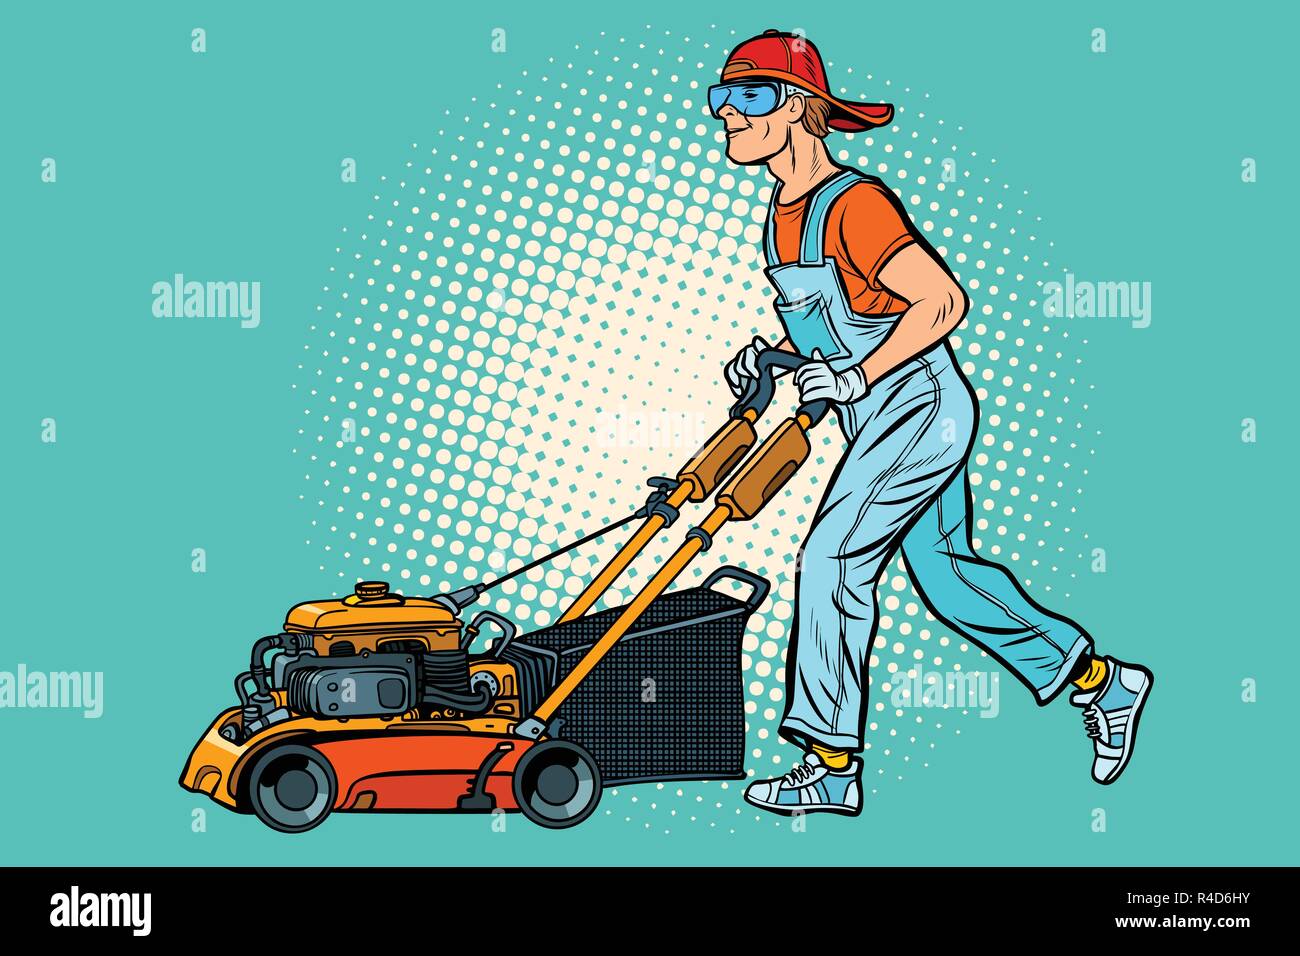 lawn mower worker. Profession and service Stock Vector